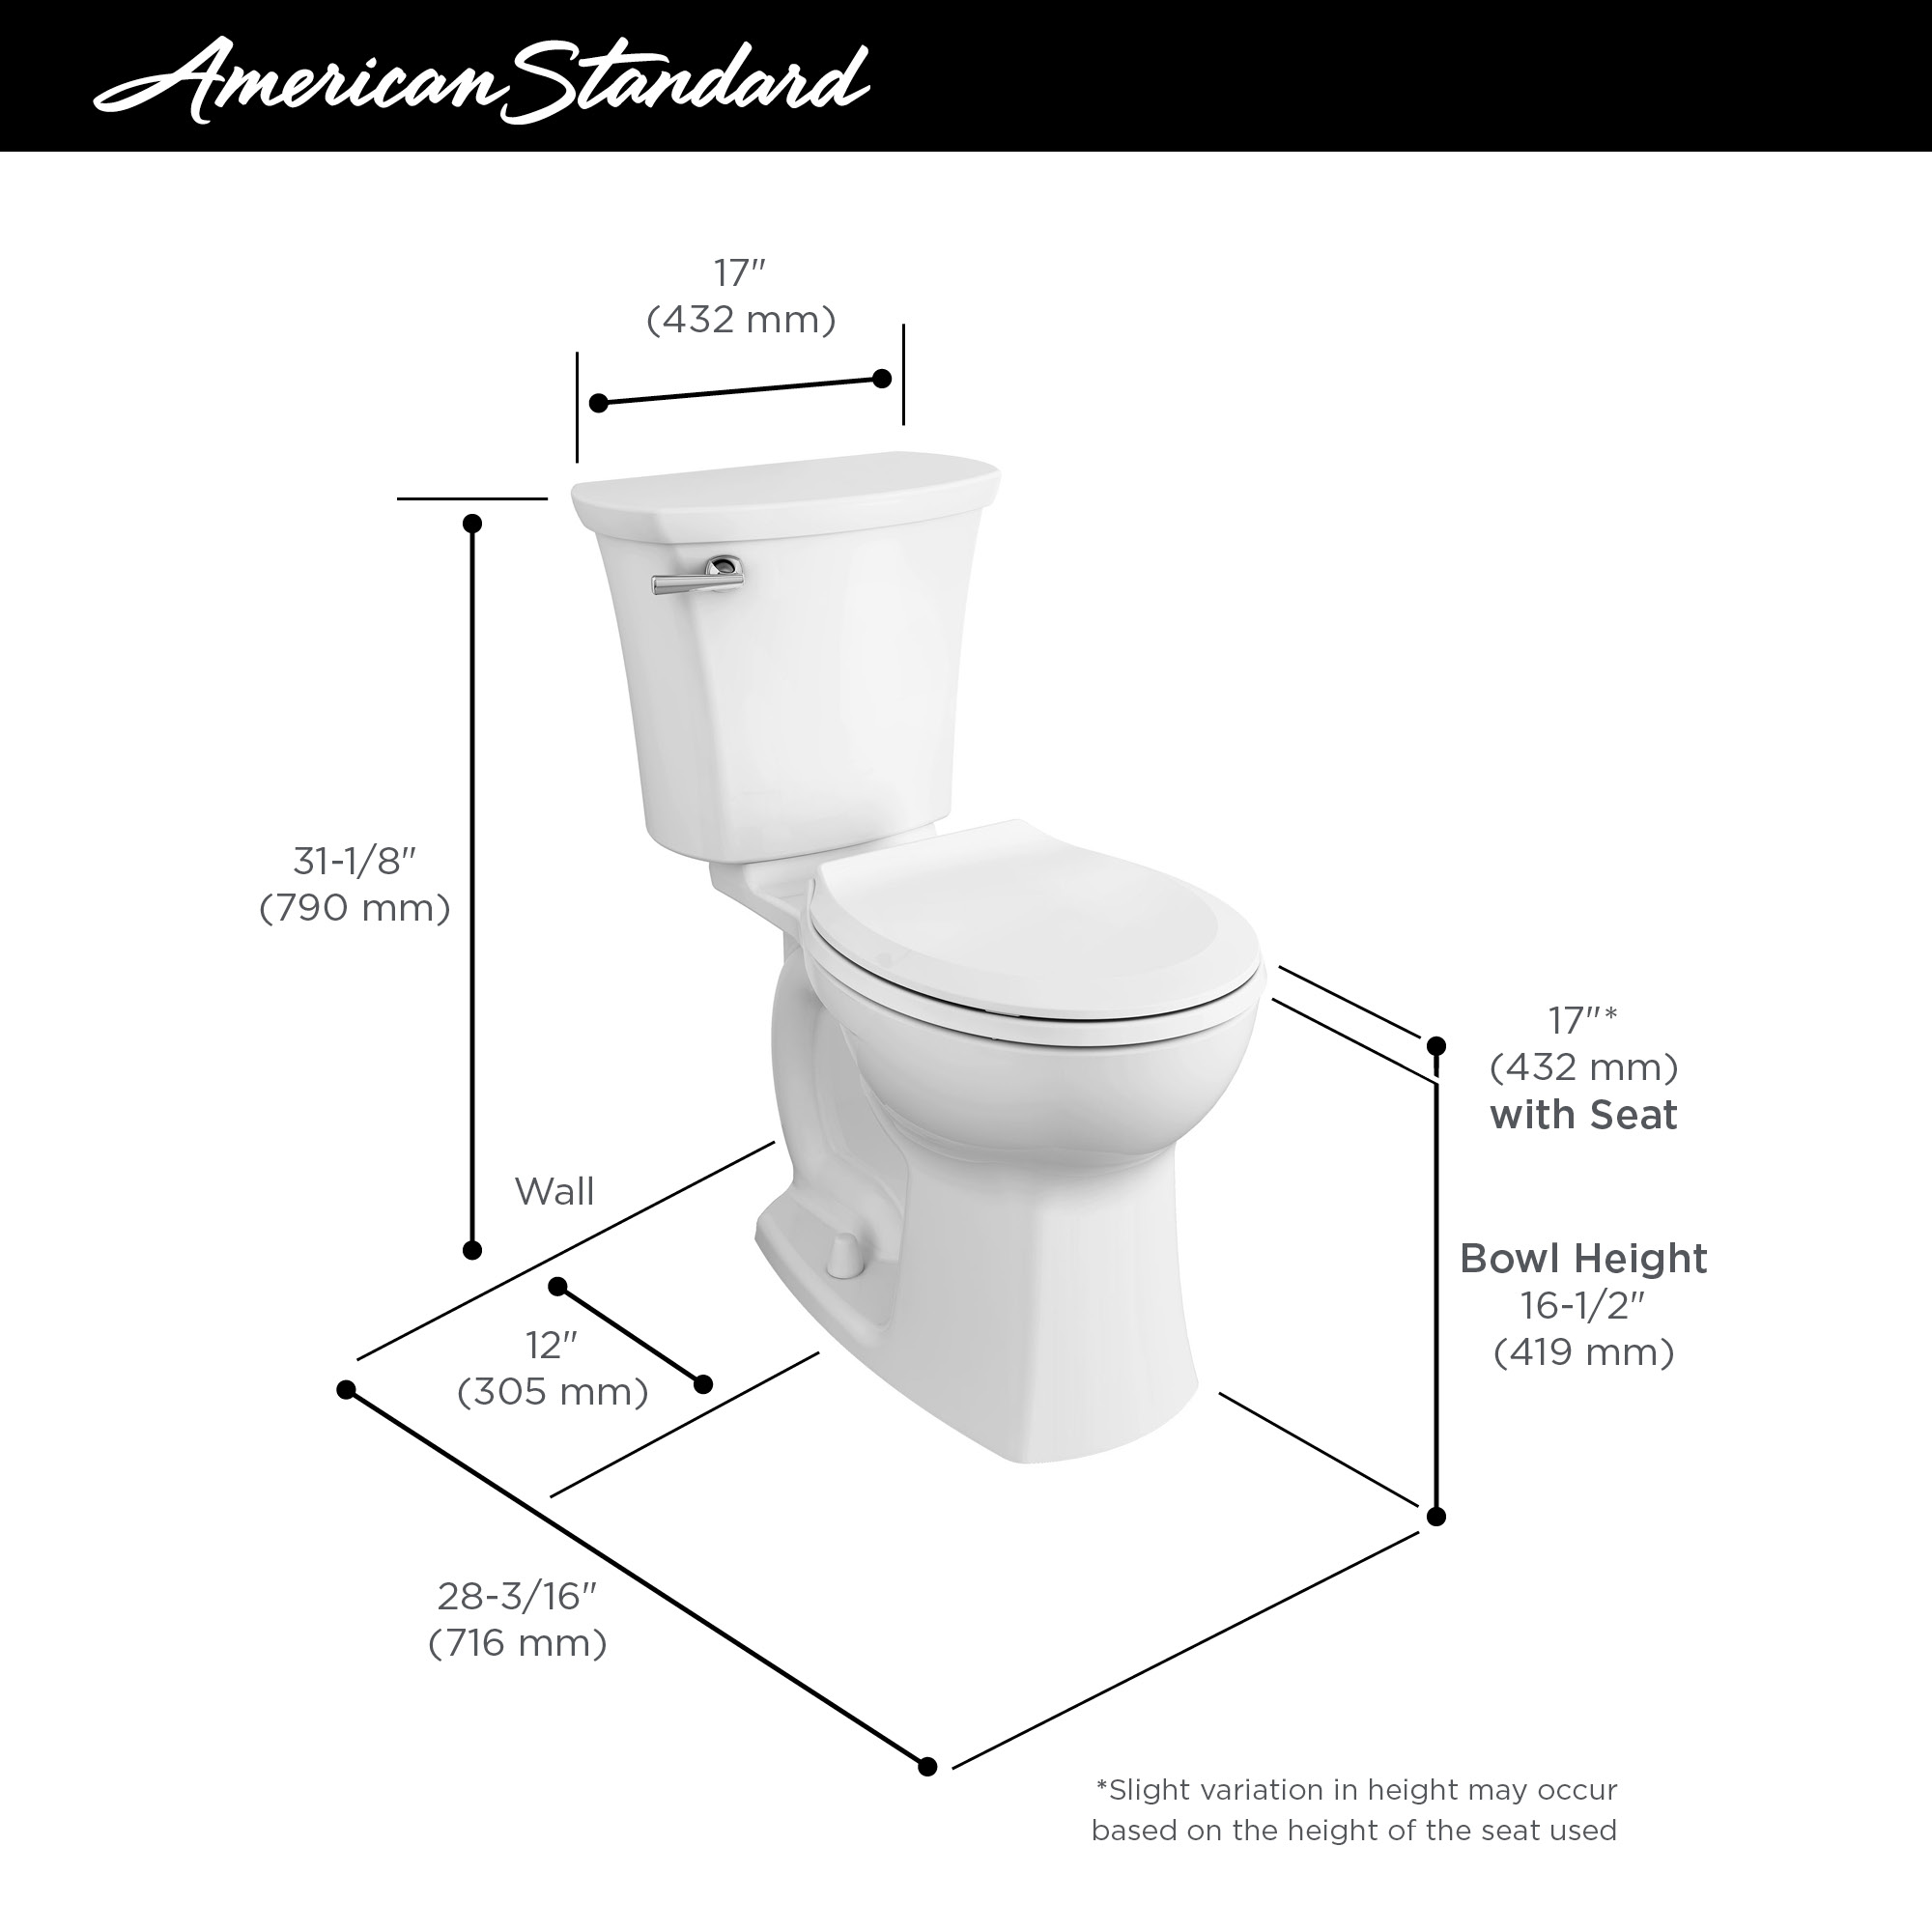 Are toilet seats a standard size?